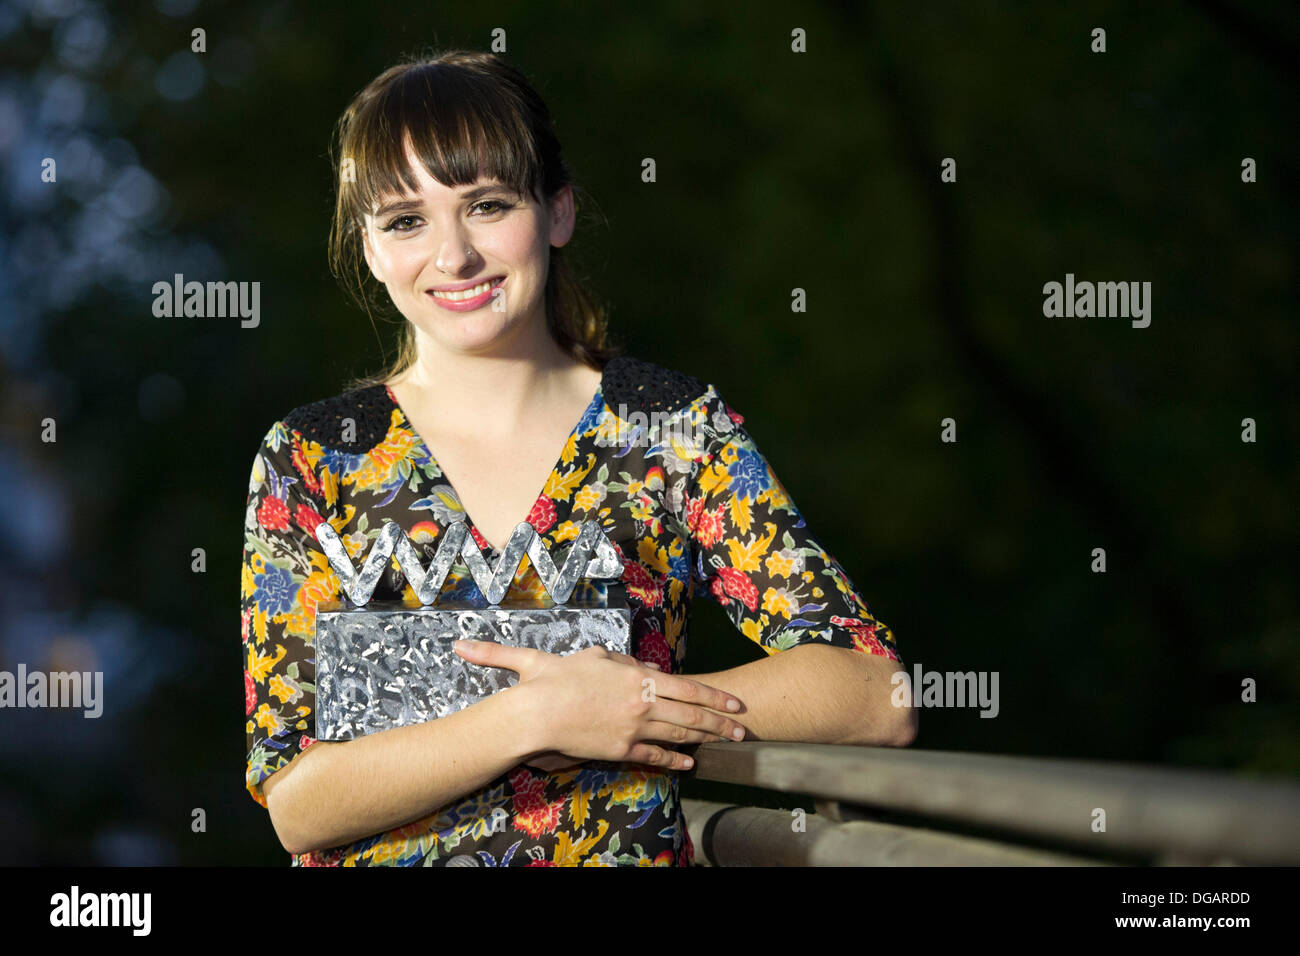 Cardiff, Wales, UK. 17th October 2013.  Georgia Ruth wins the Welsh Music Prize at the Park Plaza, Cardiff. Matthew Horwood/Alamy Live News Stock Photo